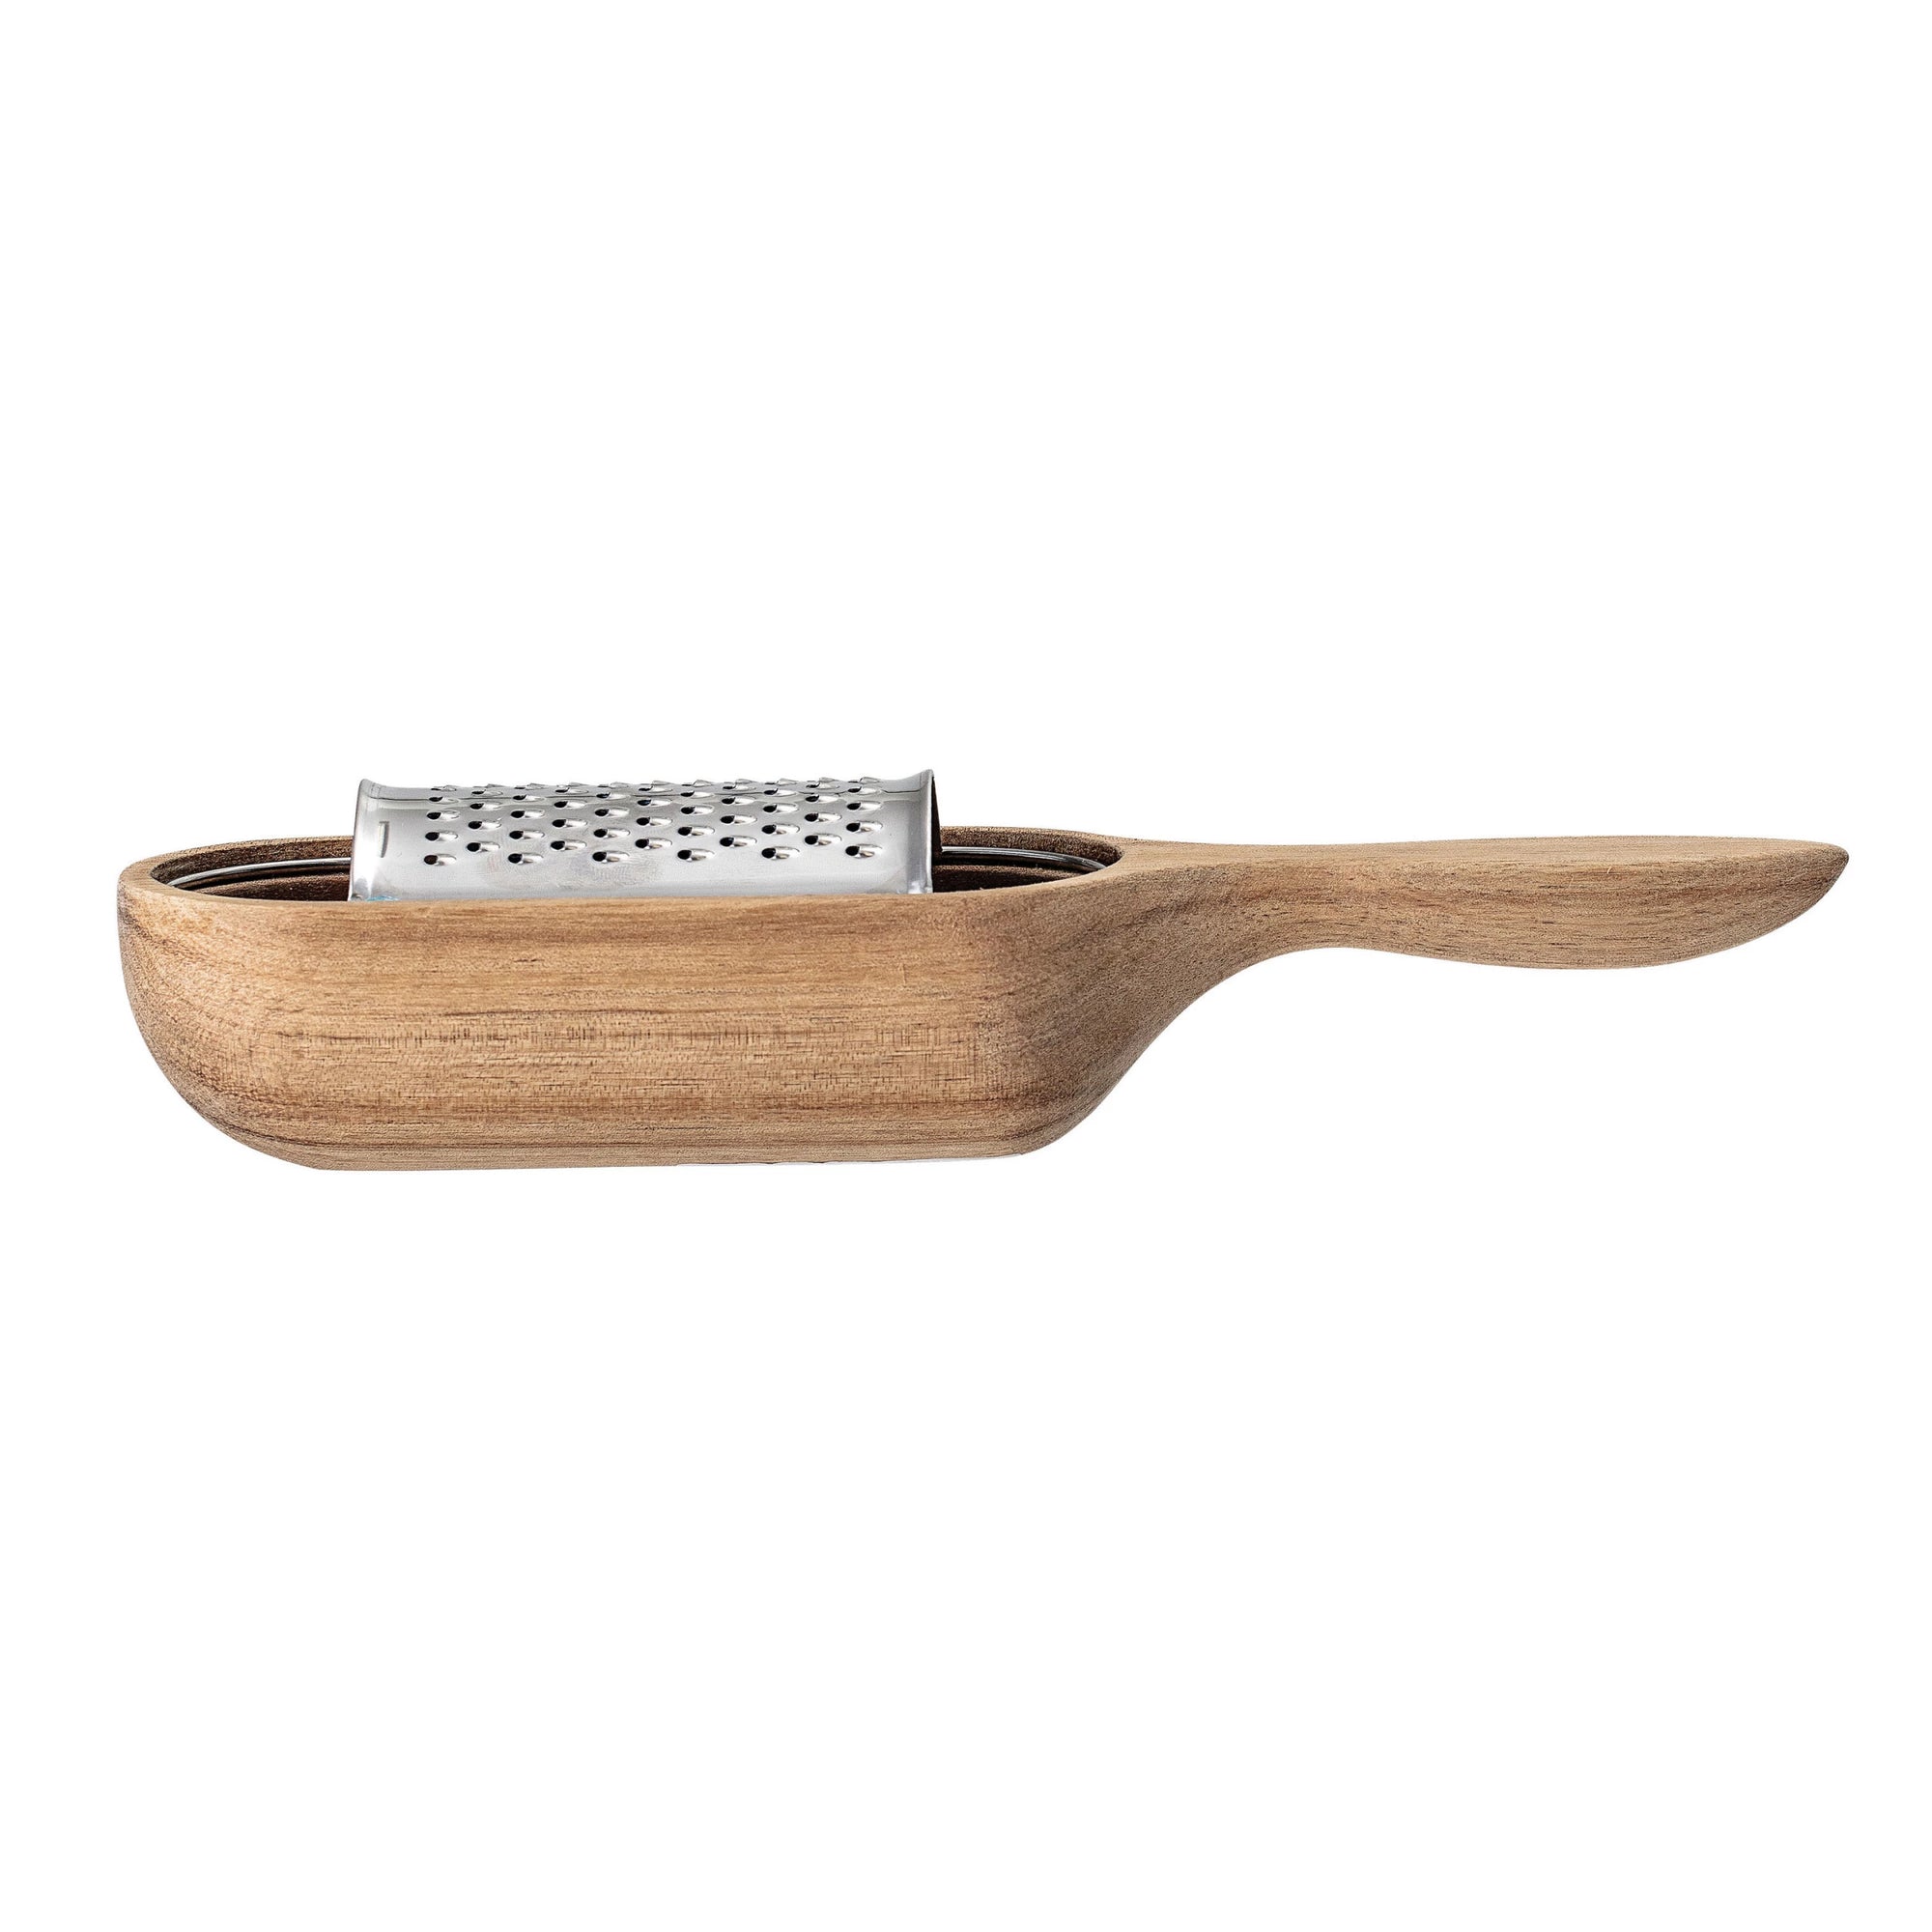 acacia wood and stainless steel cheese grater